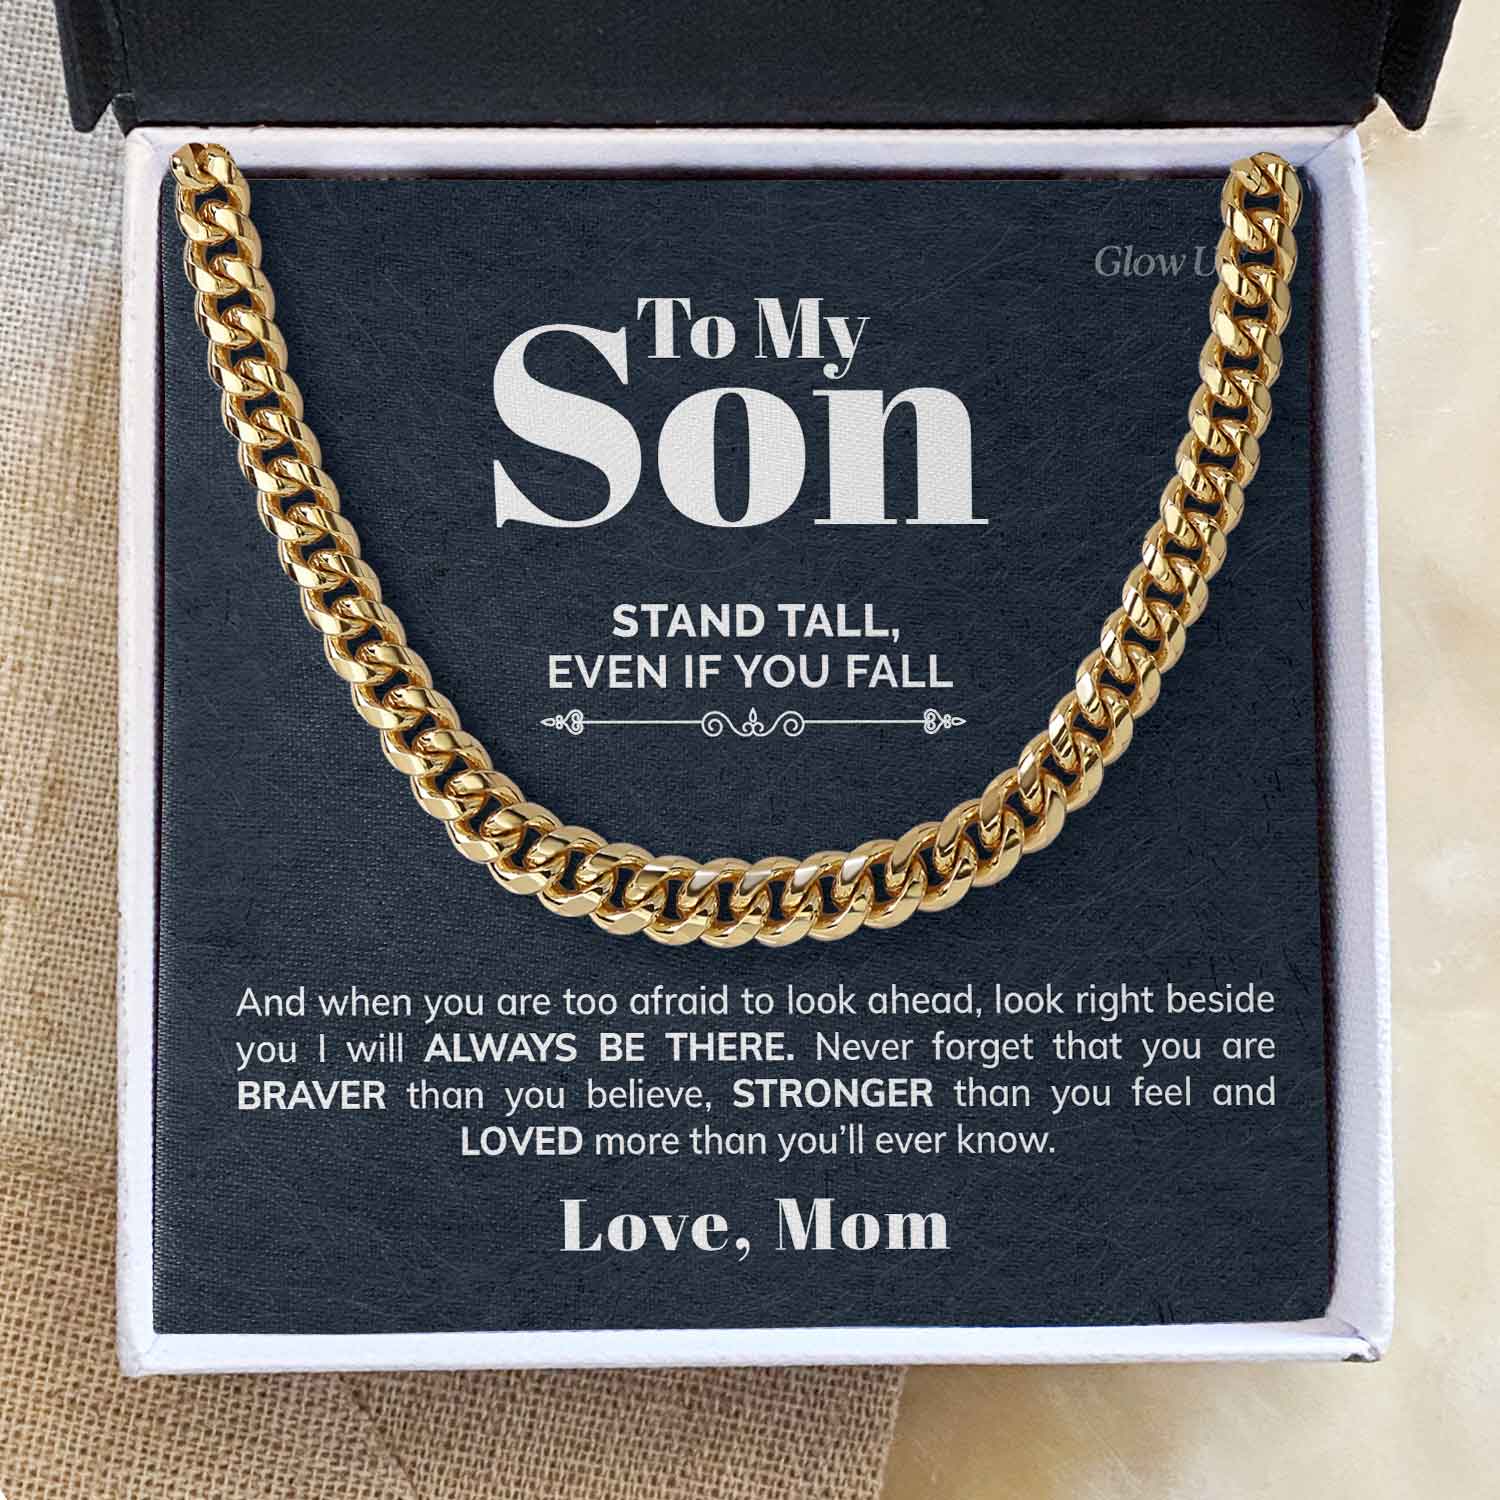 ShineOn Fulfillment Jewelry 14K Yellow Gold Finish / Two-Toned Box To My Son - Stronger than you feel - Cuban Link Chain Necklace